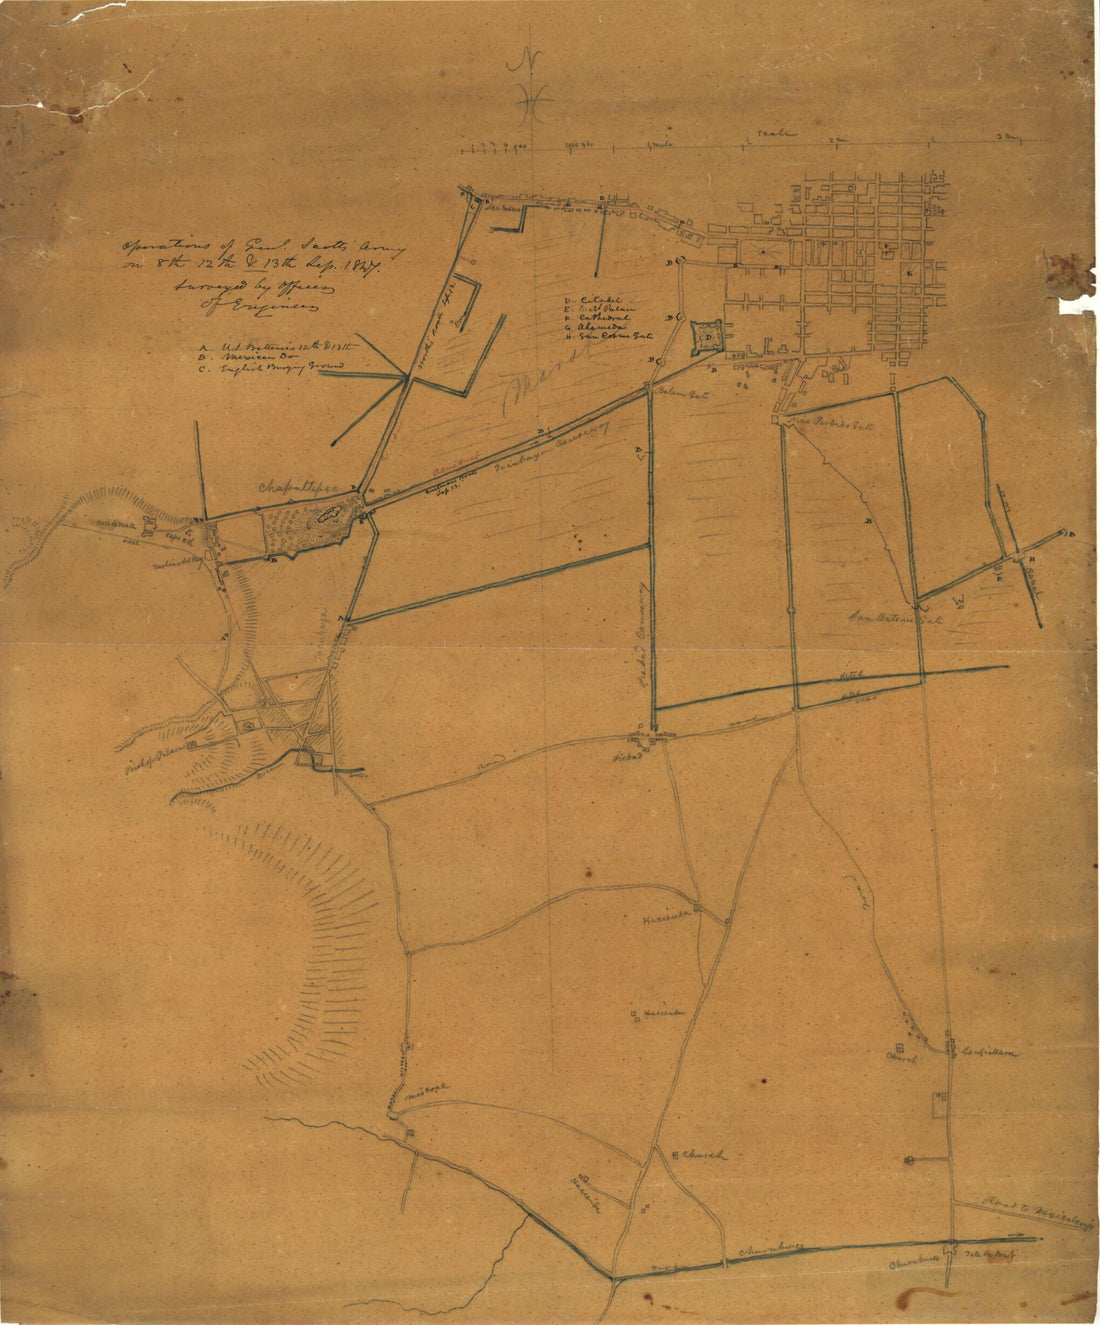 This old map of Operations of Genl. Scott&